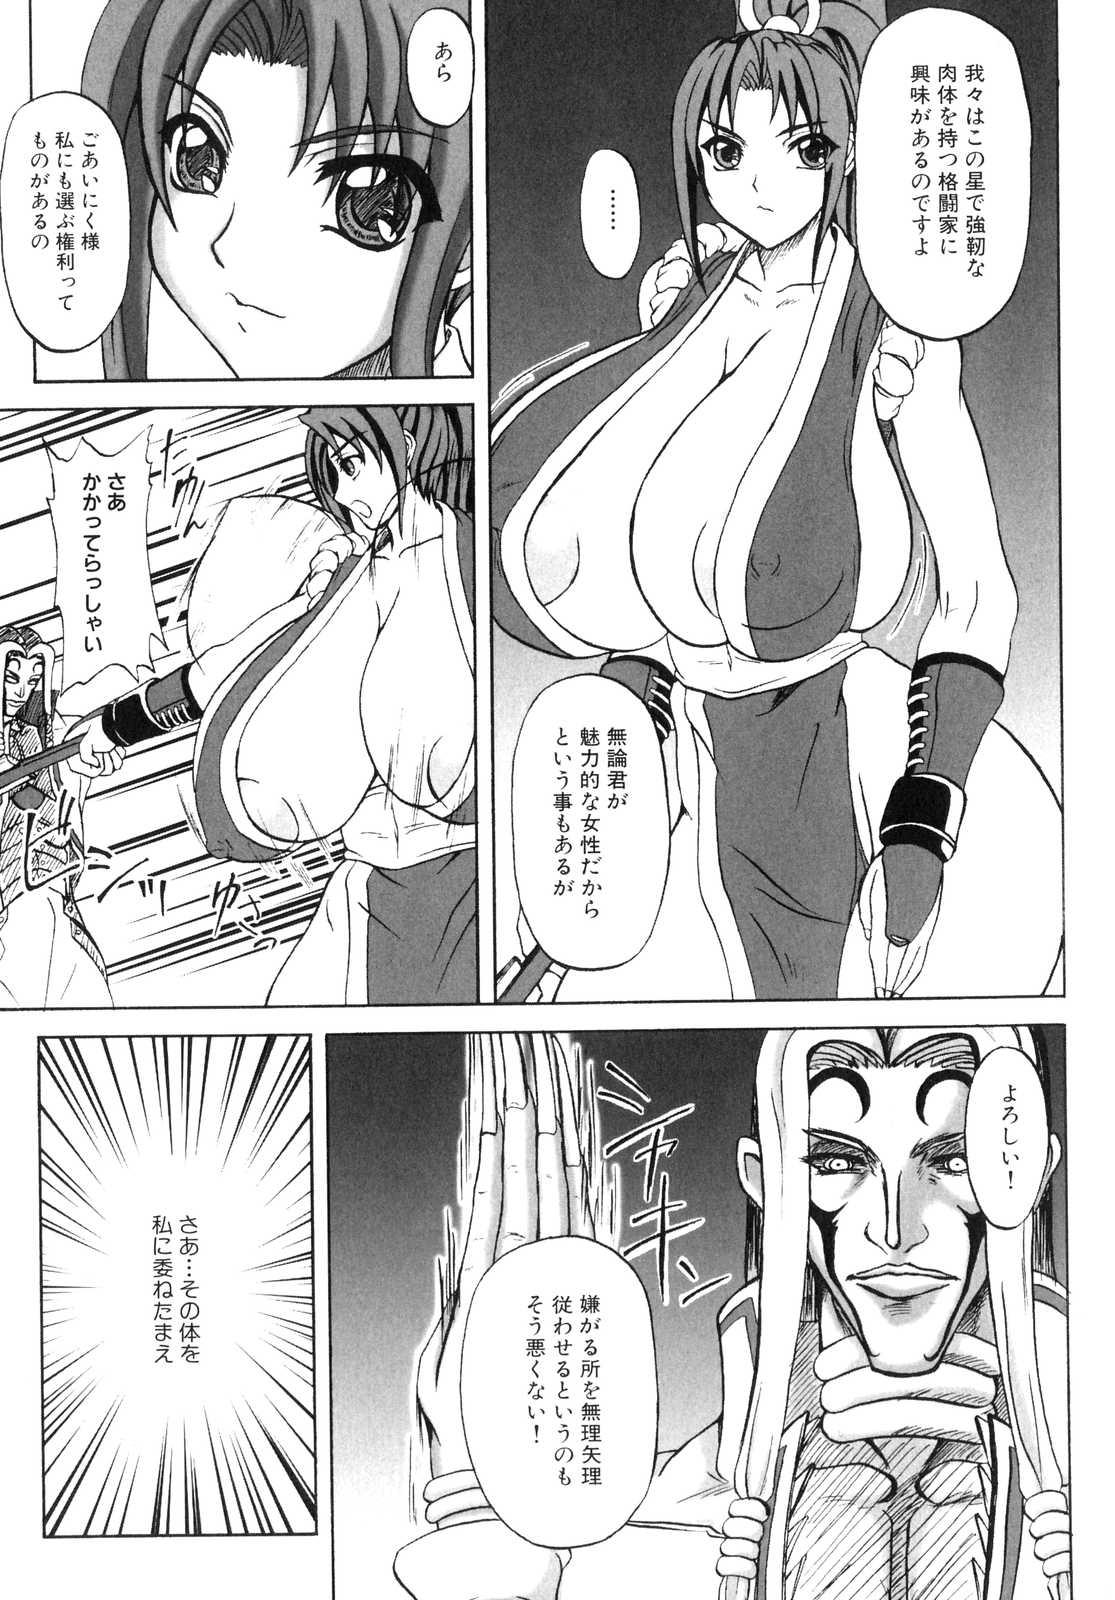 Asians Mars Impact - King of fighters Euro - Page 4